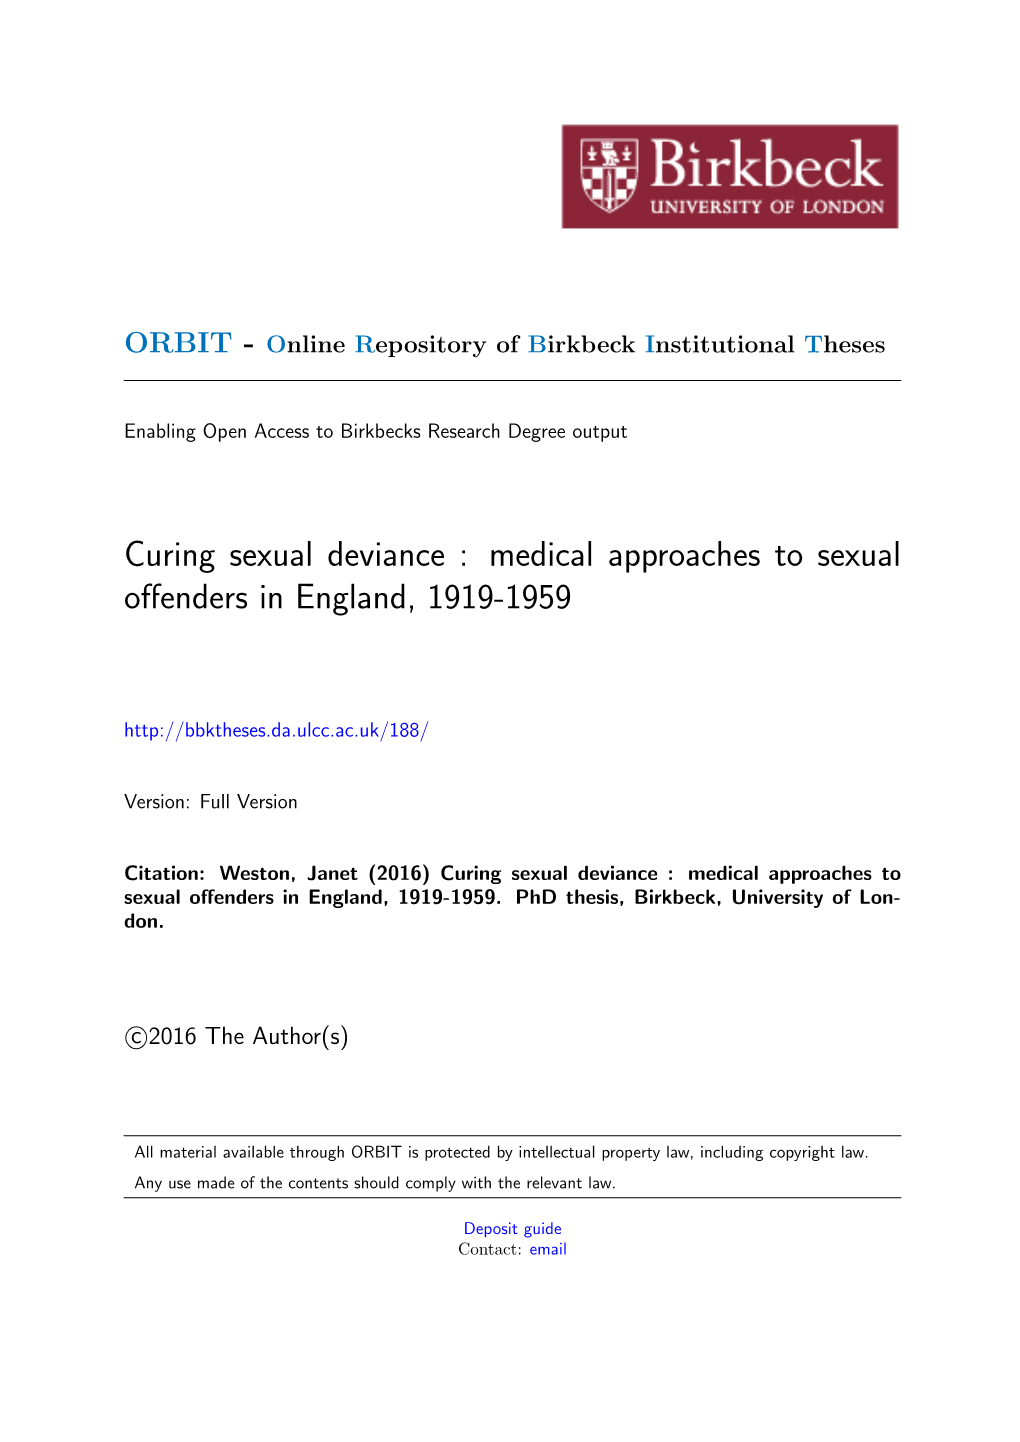 Curing Sexual Deviance : Medical Approaches to Sexual Oﬀenders in England, 1919-1959